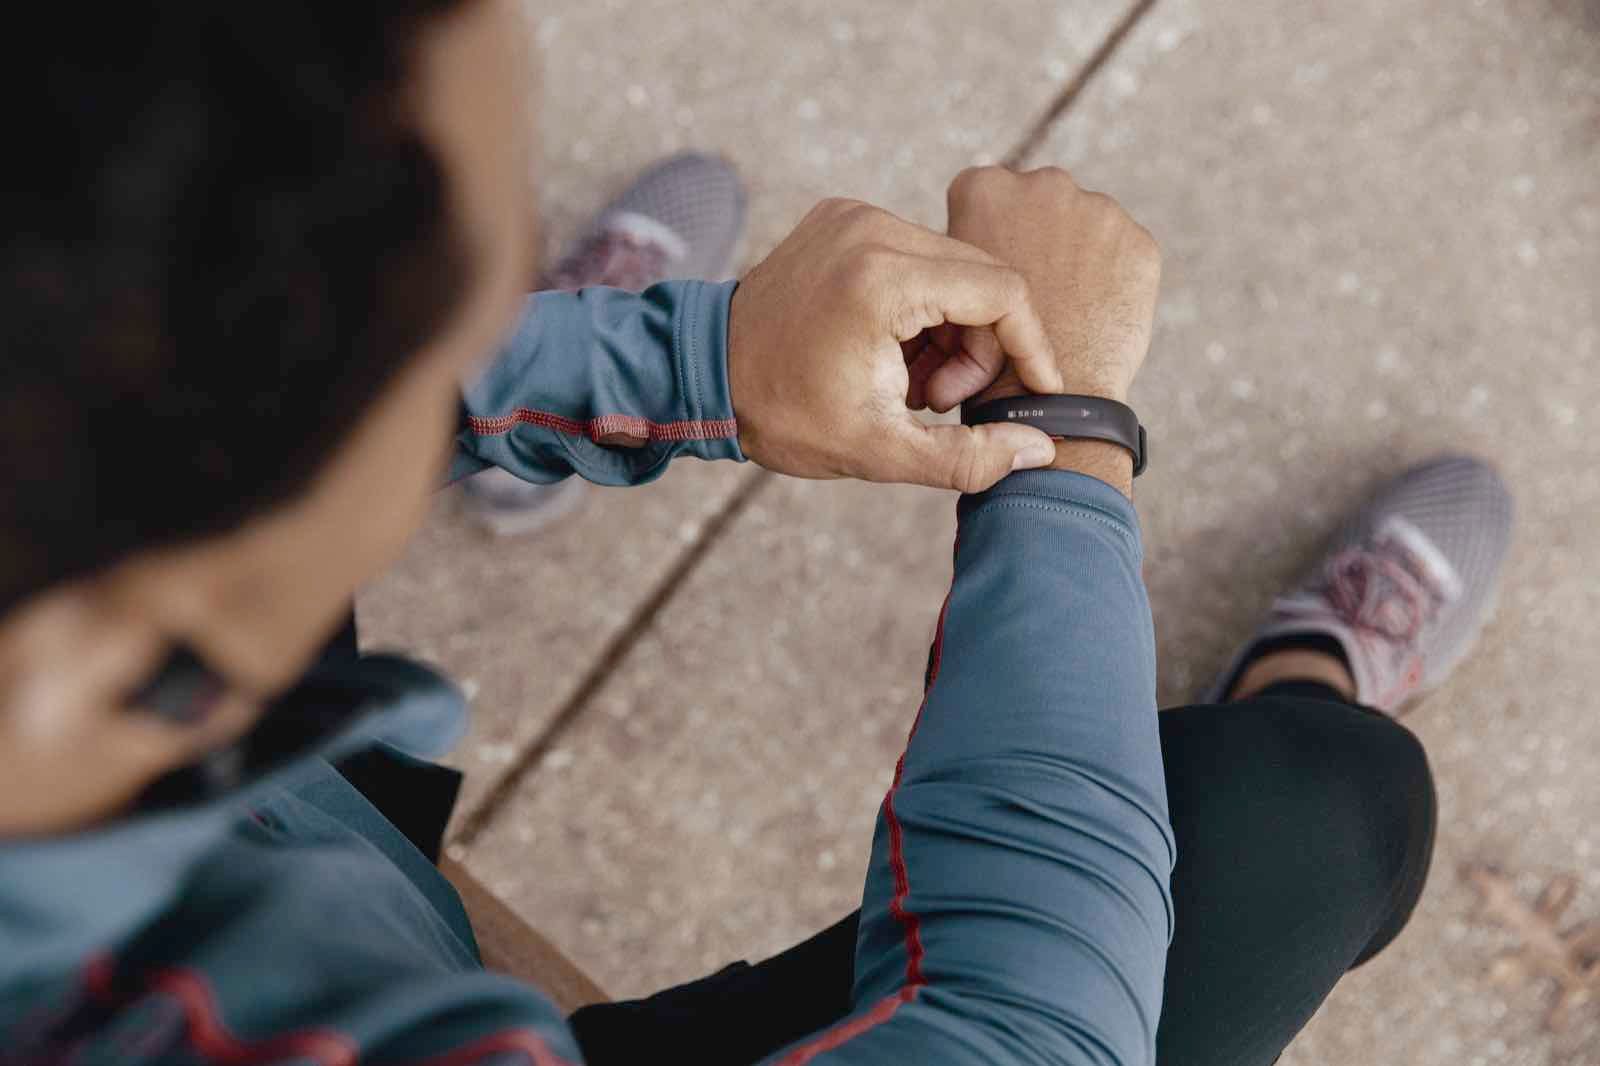 ua healthbox the new wearable system from htc and under armour image 32